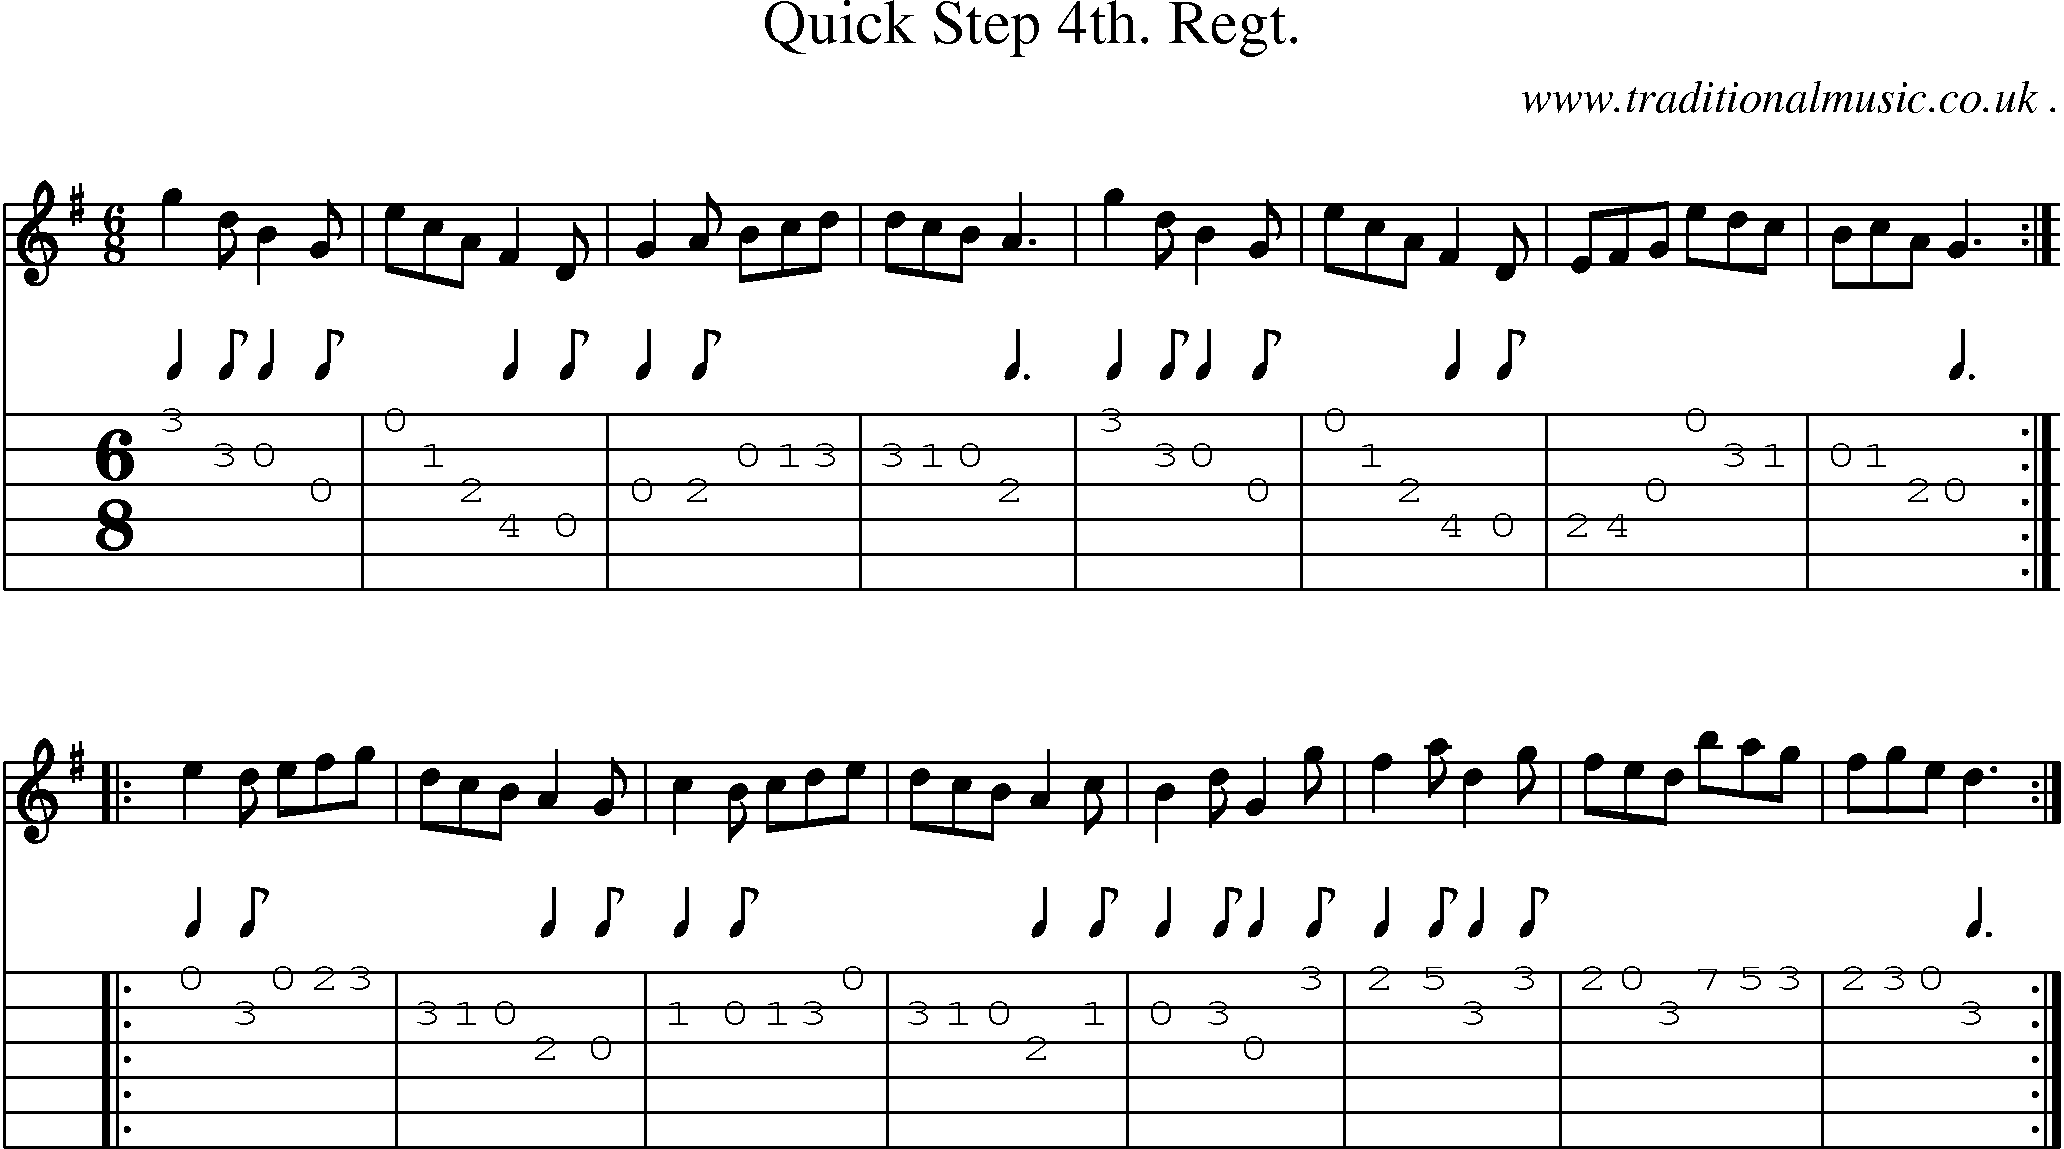 Sheet-Music and Guitar Tabs for Quick Step 4th Regt